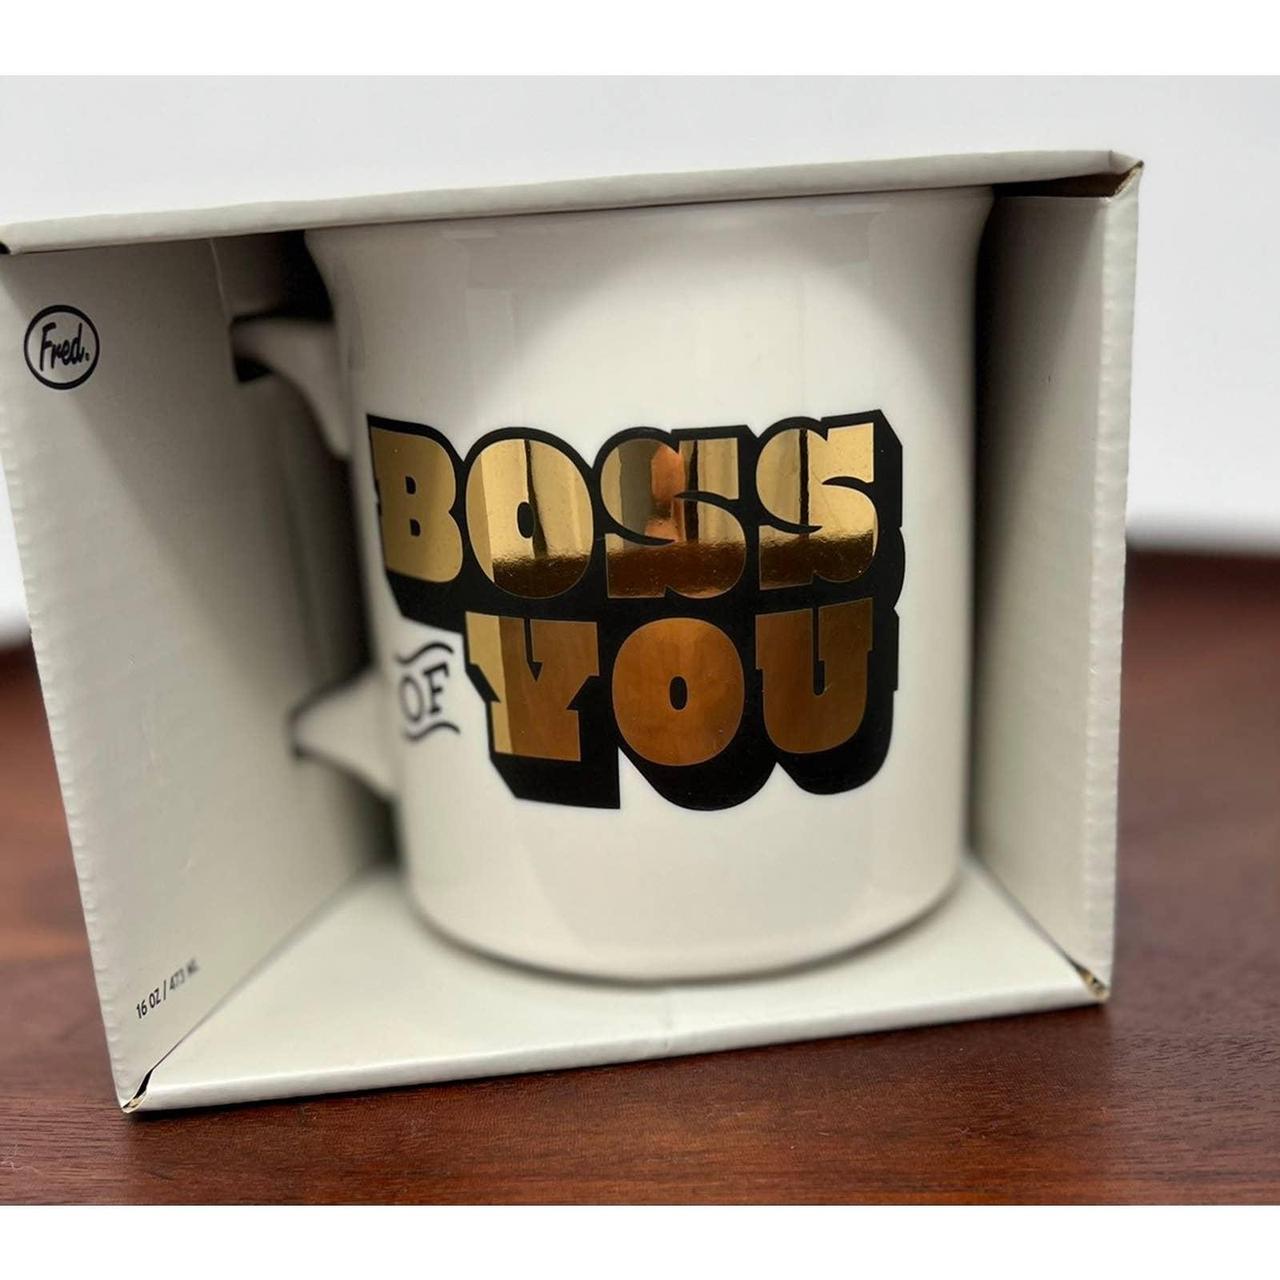 Product Image 1 - Say Anything
BOSS OF YOU
16 ounce